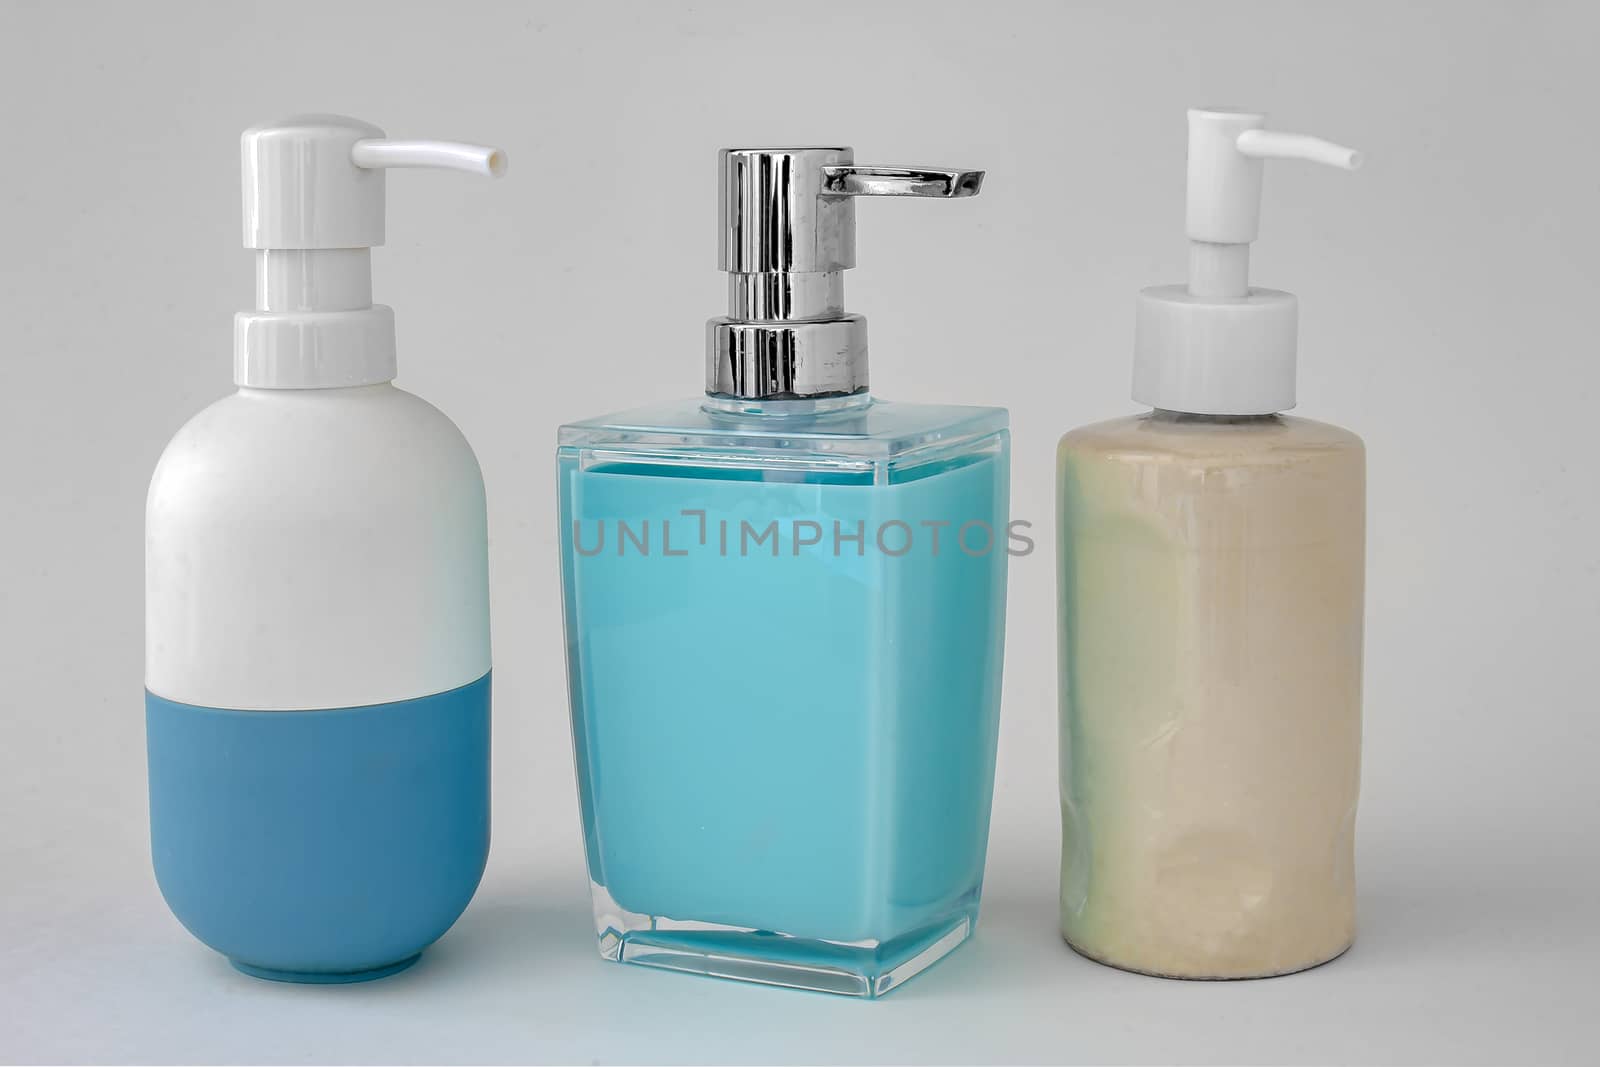 Colorful soap dispenser for bathrooms or kitchen sinks on a white background